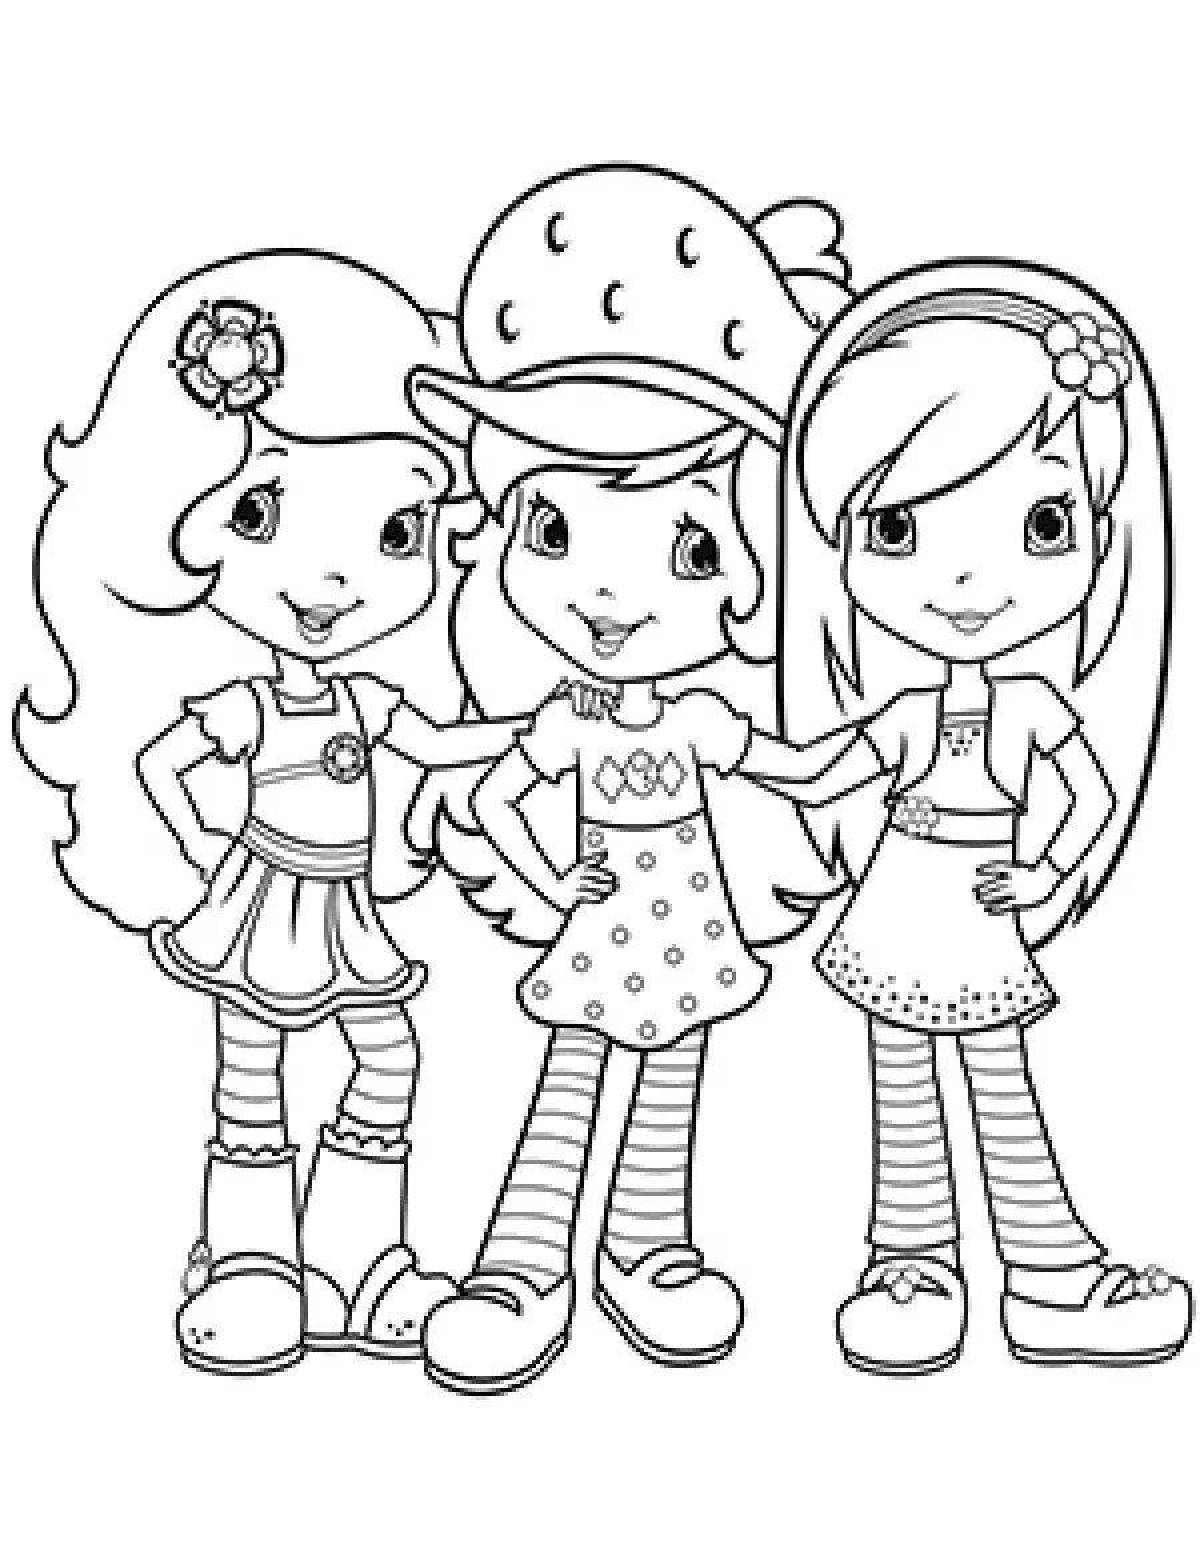 Fun coloring page for girls